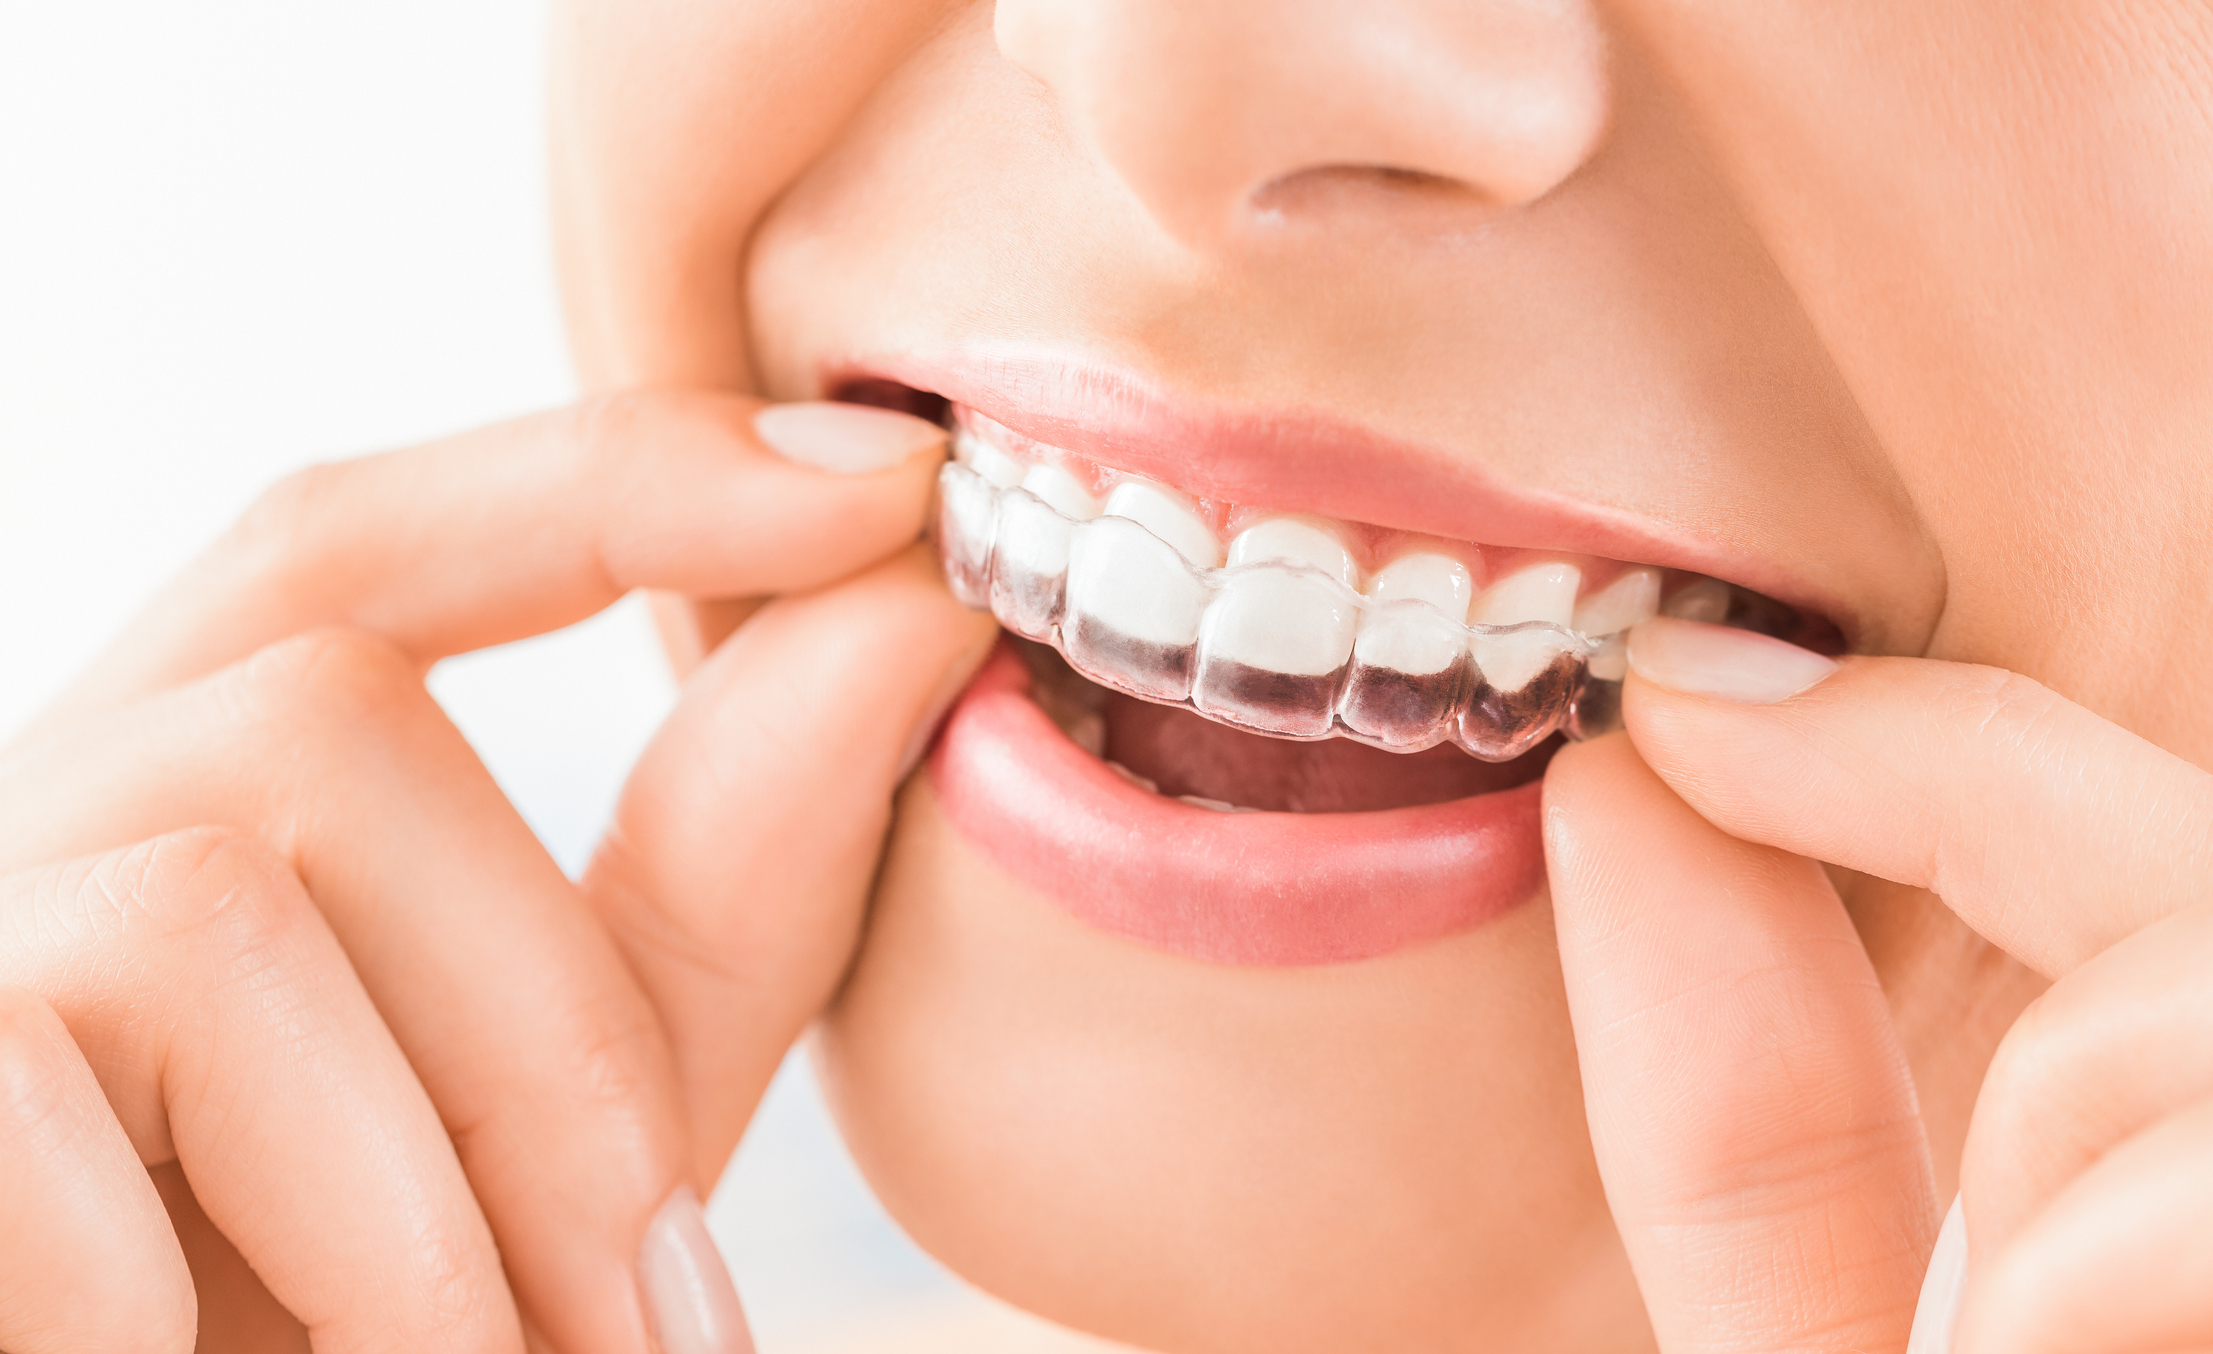 Are Invisible Braces Worth It? How They Work?